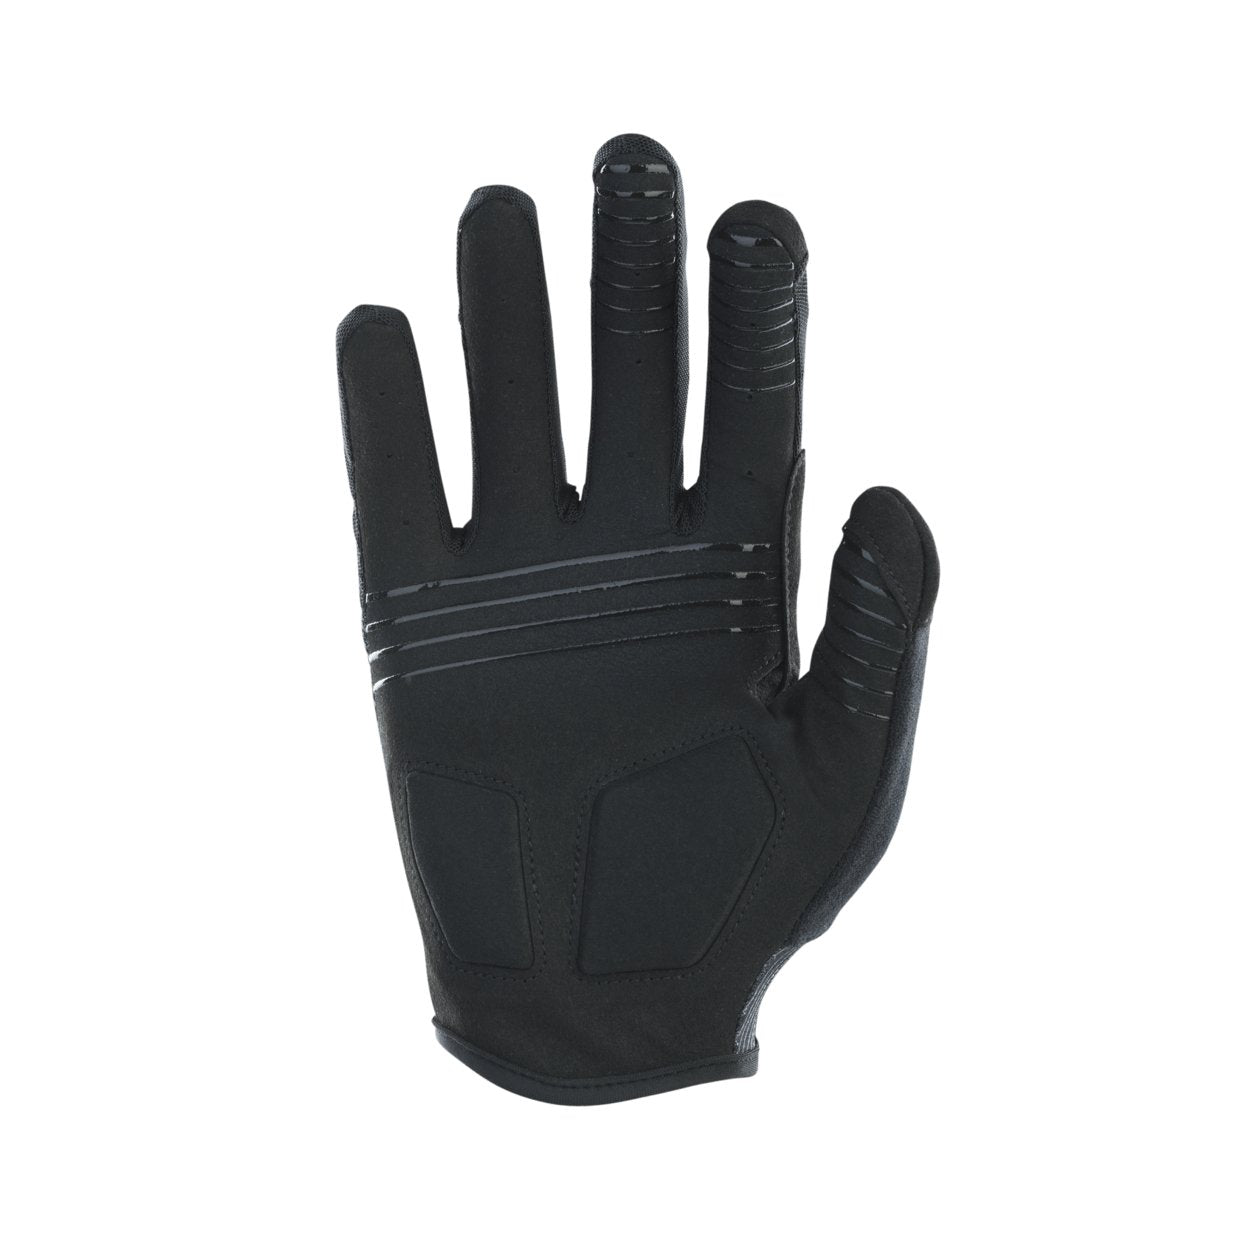 ION MTB Gloves Traze Long 2023 - Worthing Watersports - 9010583101453 - Gloves - ION Bike